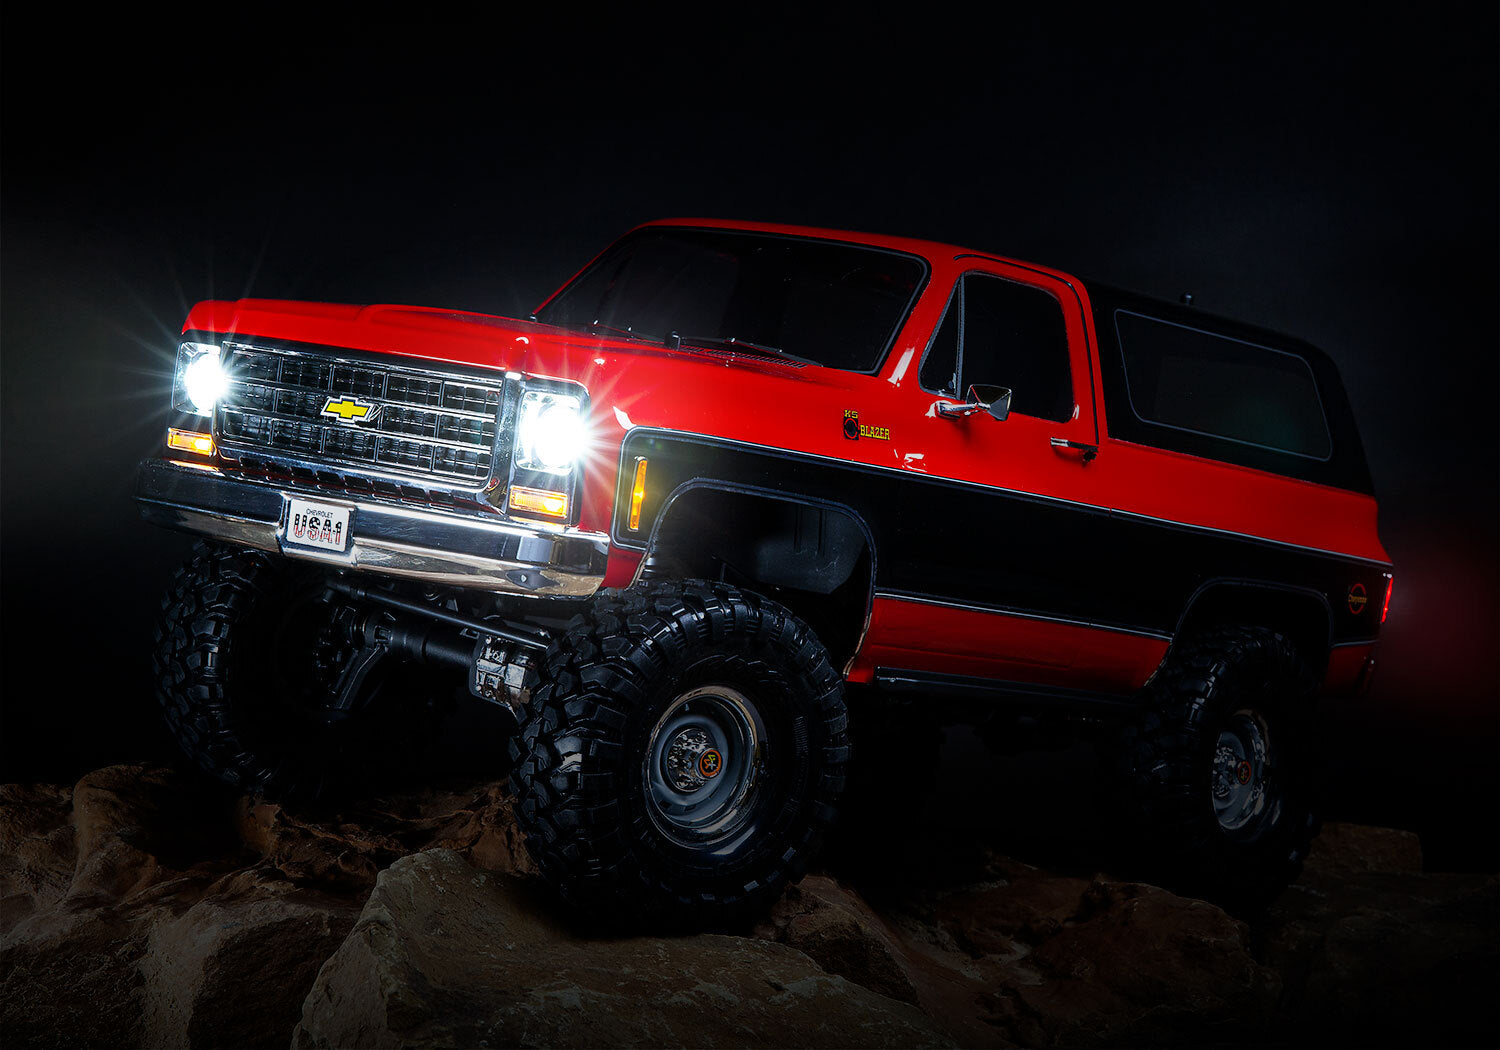 Pro Scale® LED light set, TRX-4® Chevrolet Blazer or K10 Truck (1979), complete with power module (contains headlights, tail lights, side marker lights, & distribution block) (fits #8130 or 9212 series bodies)